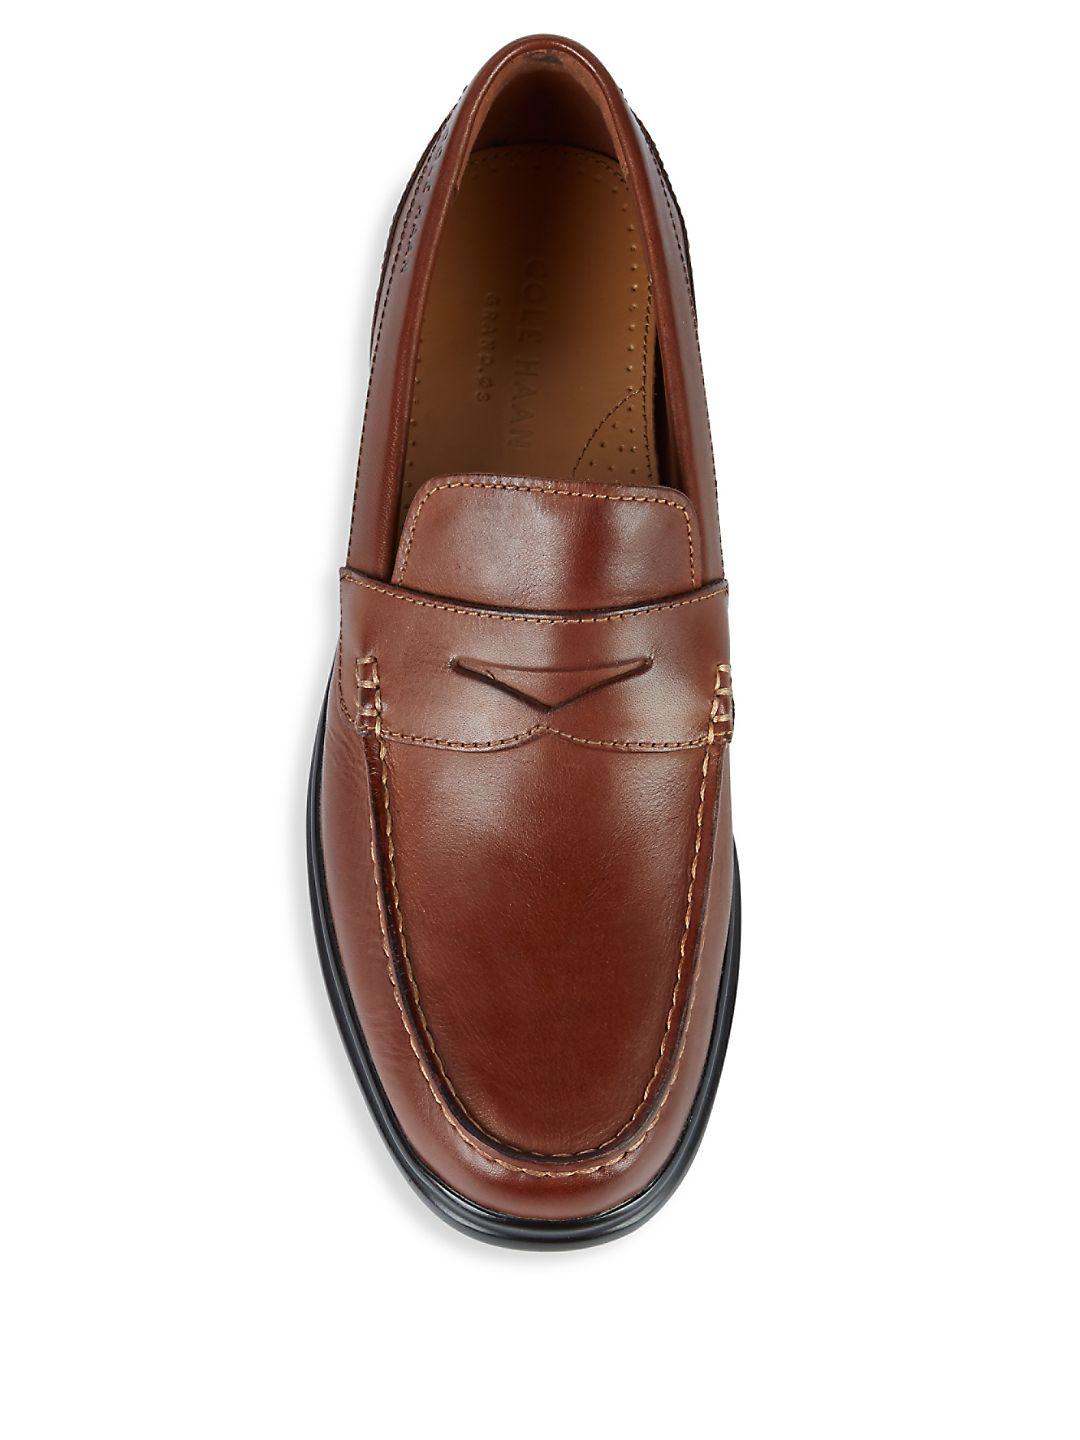 Cole Haan Santa Barbara Leather Penny Loafers in Brown for Men - Lyst